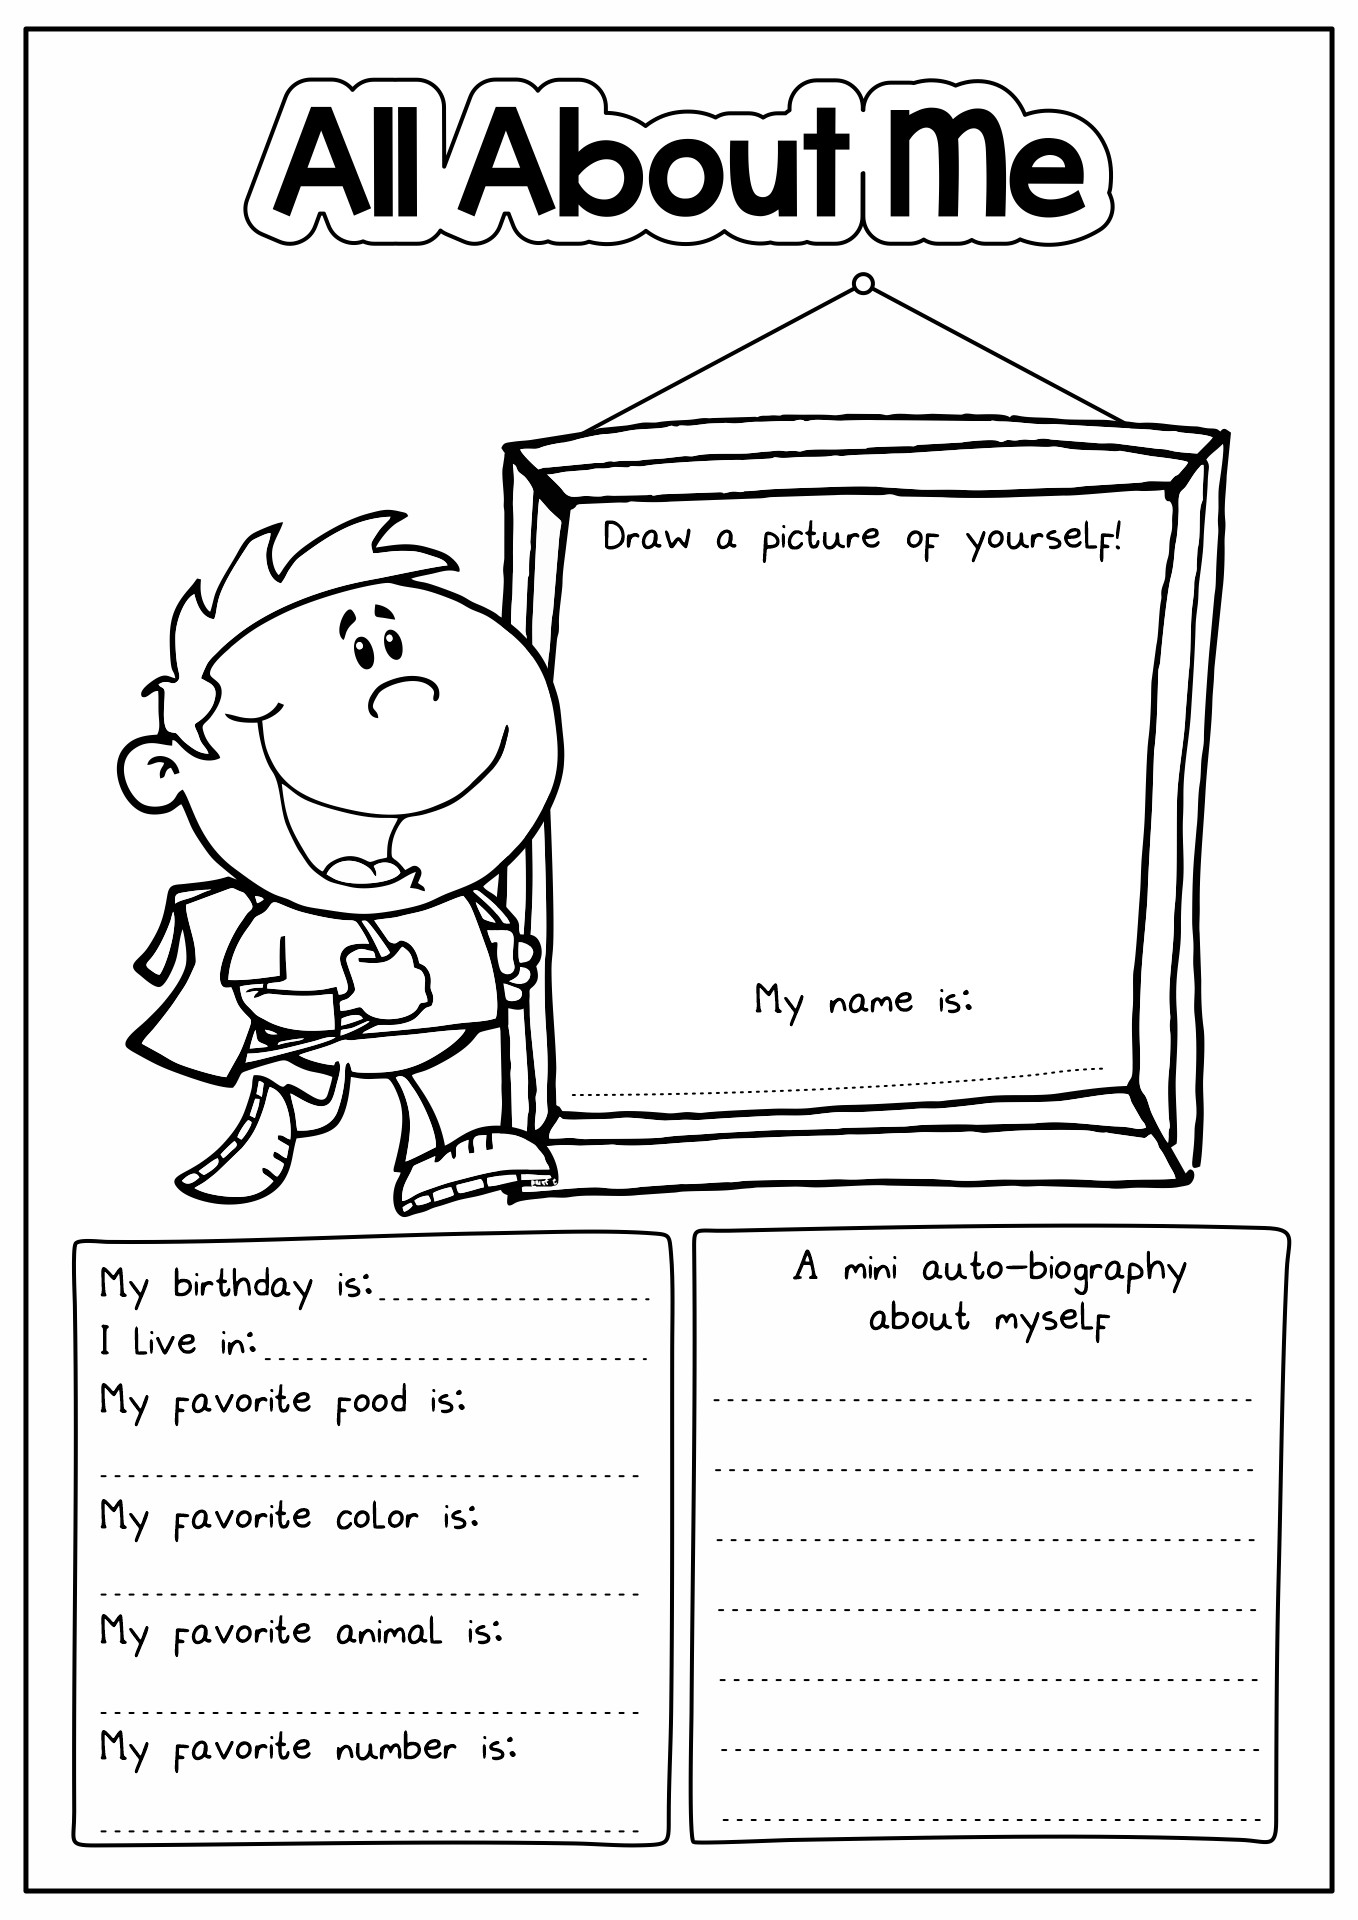 14-best-images-of-all-about-me-printable-worksheet-for-adults-all-about-me-printable-sheet